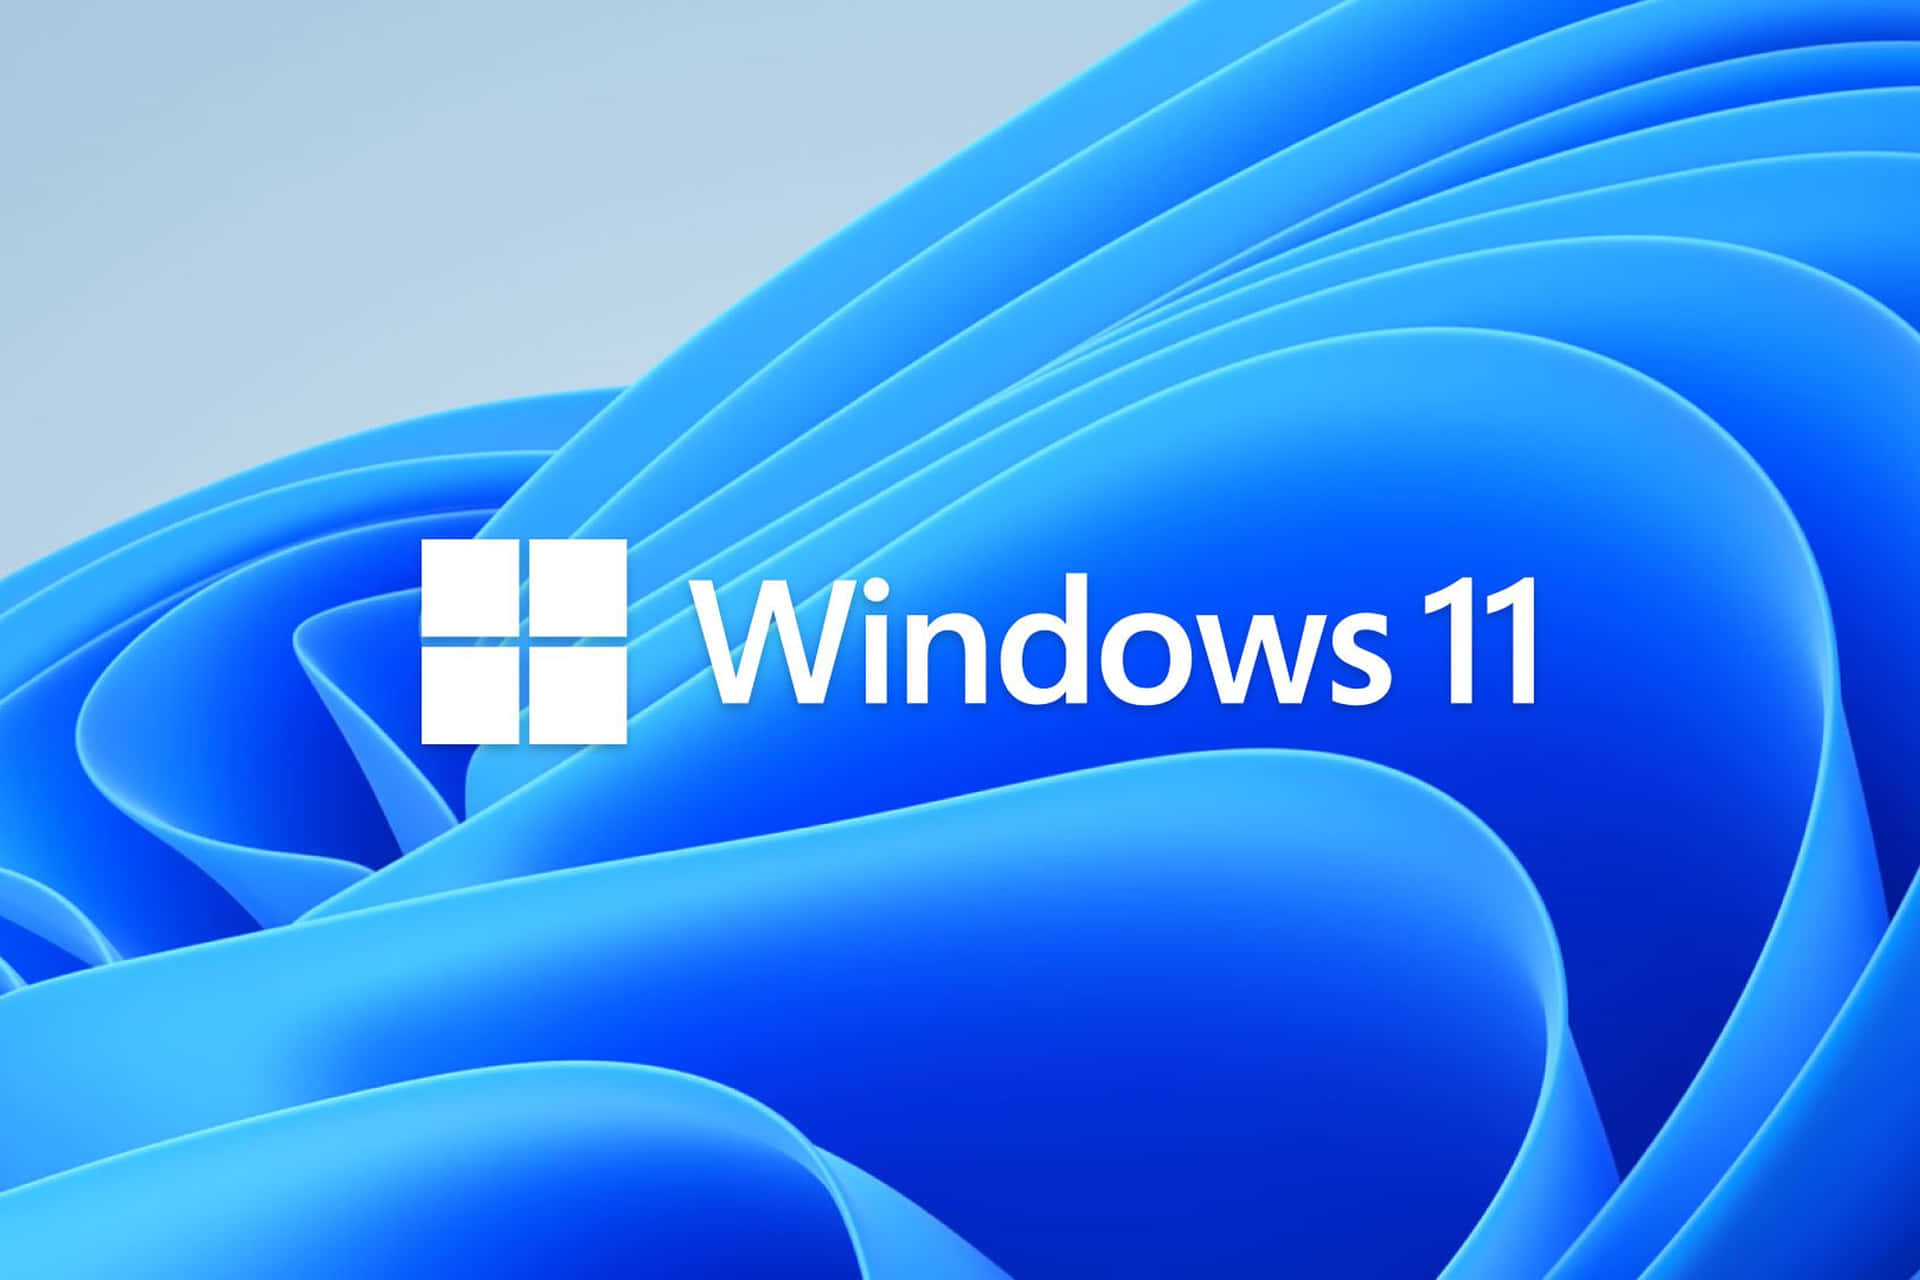 Get to know the latest version of Windows.